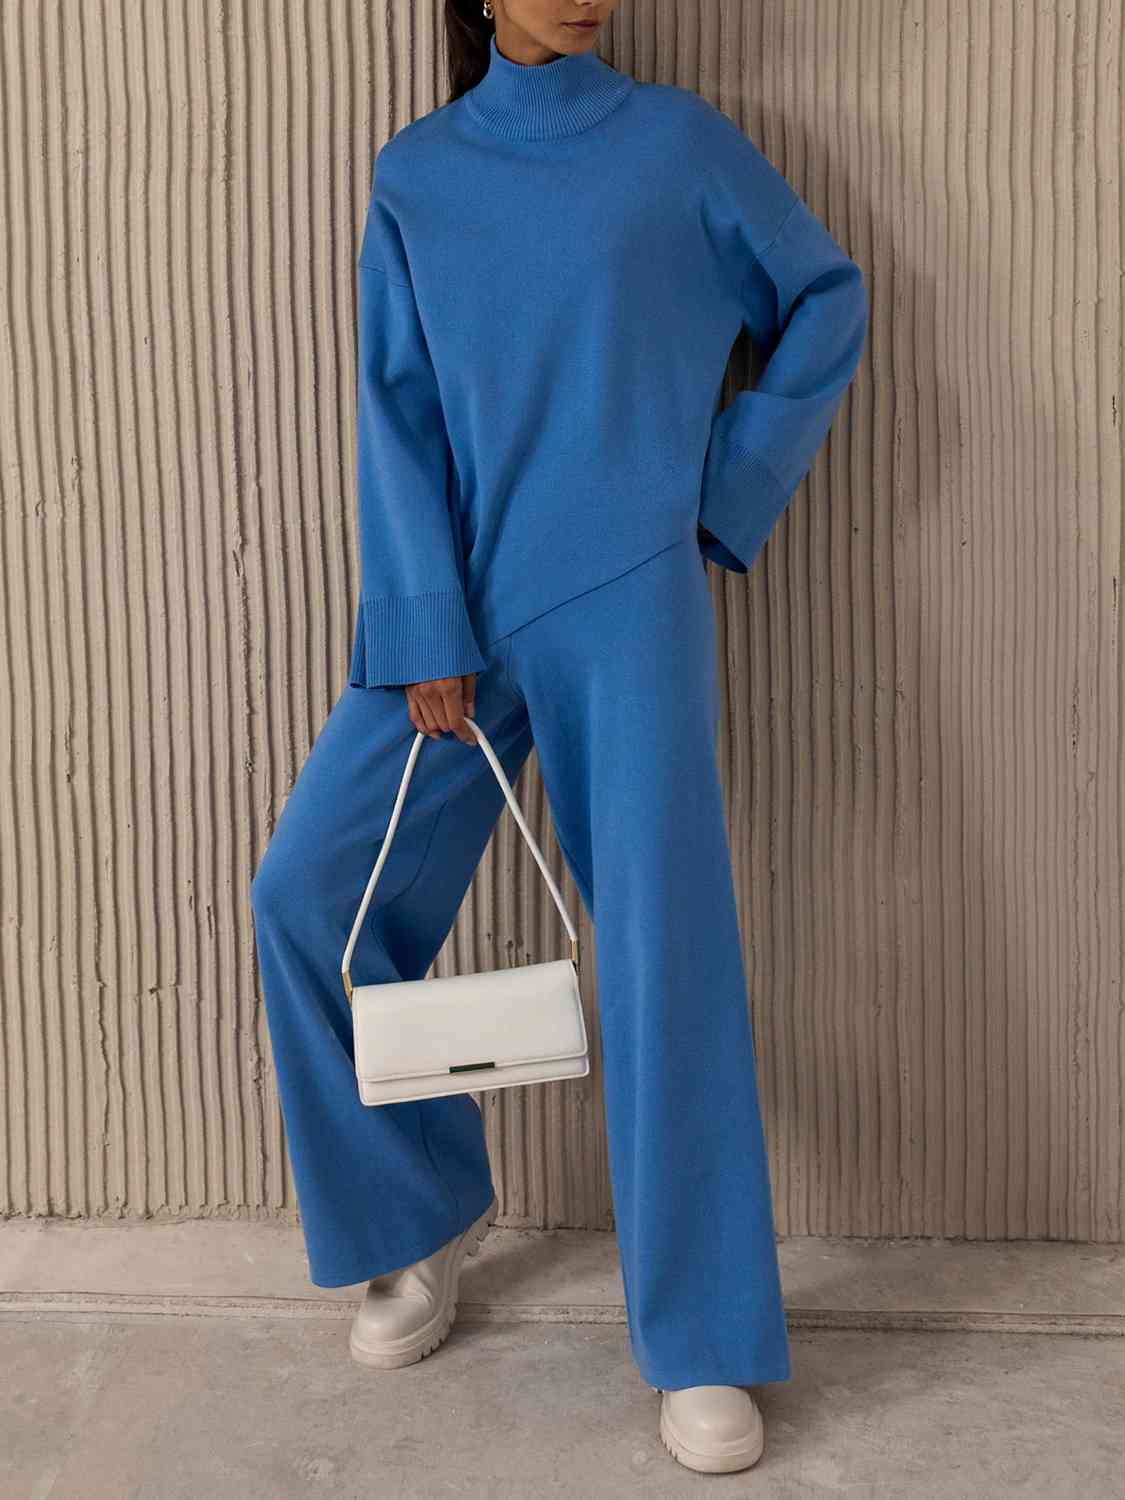 Classy Chic Asymmetrical Knit Outfit (5 Colors)